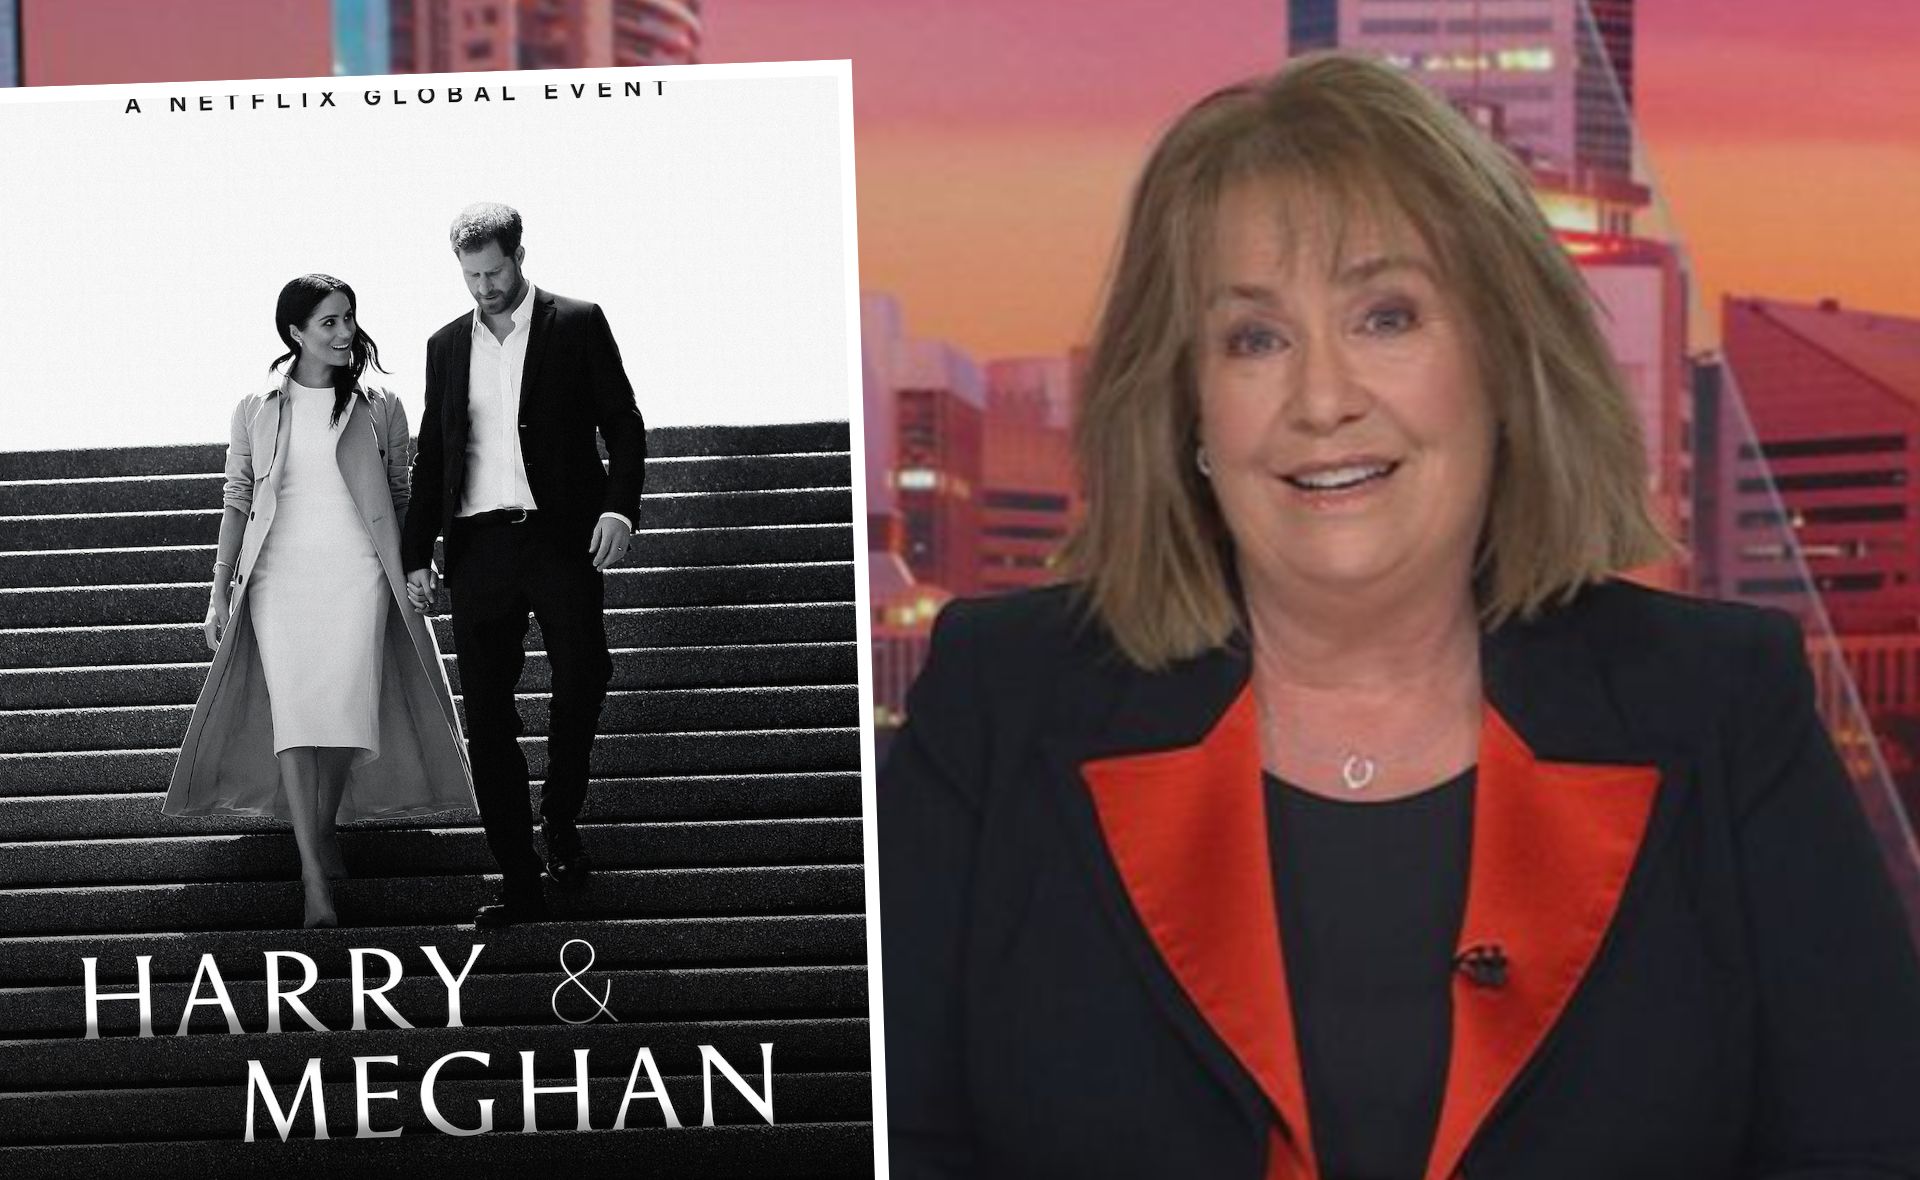 Tracy Grimshaw’s surprise appearance in the Harry & Meghan documentary